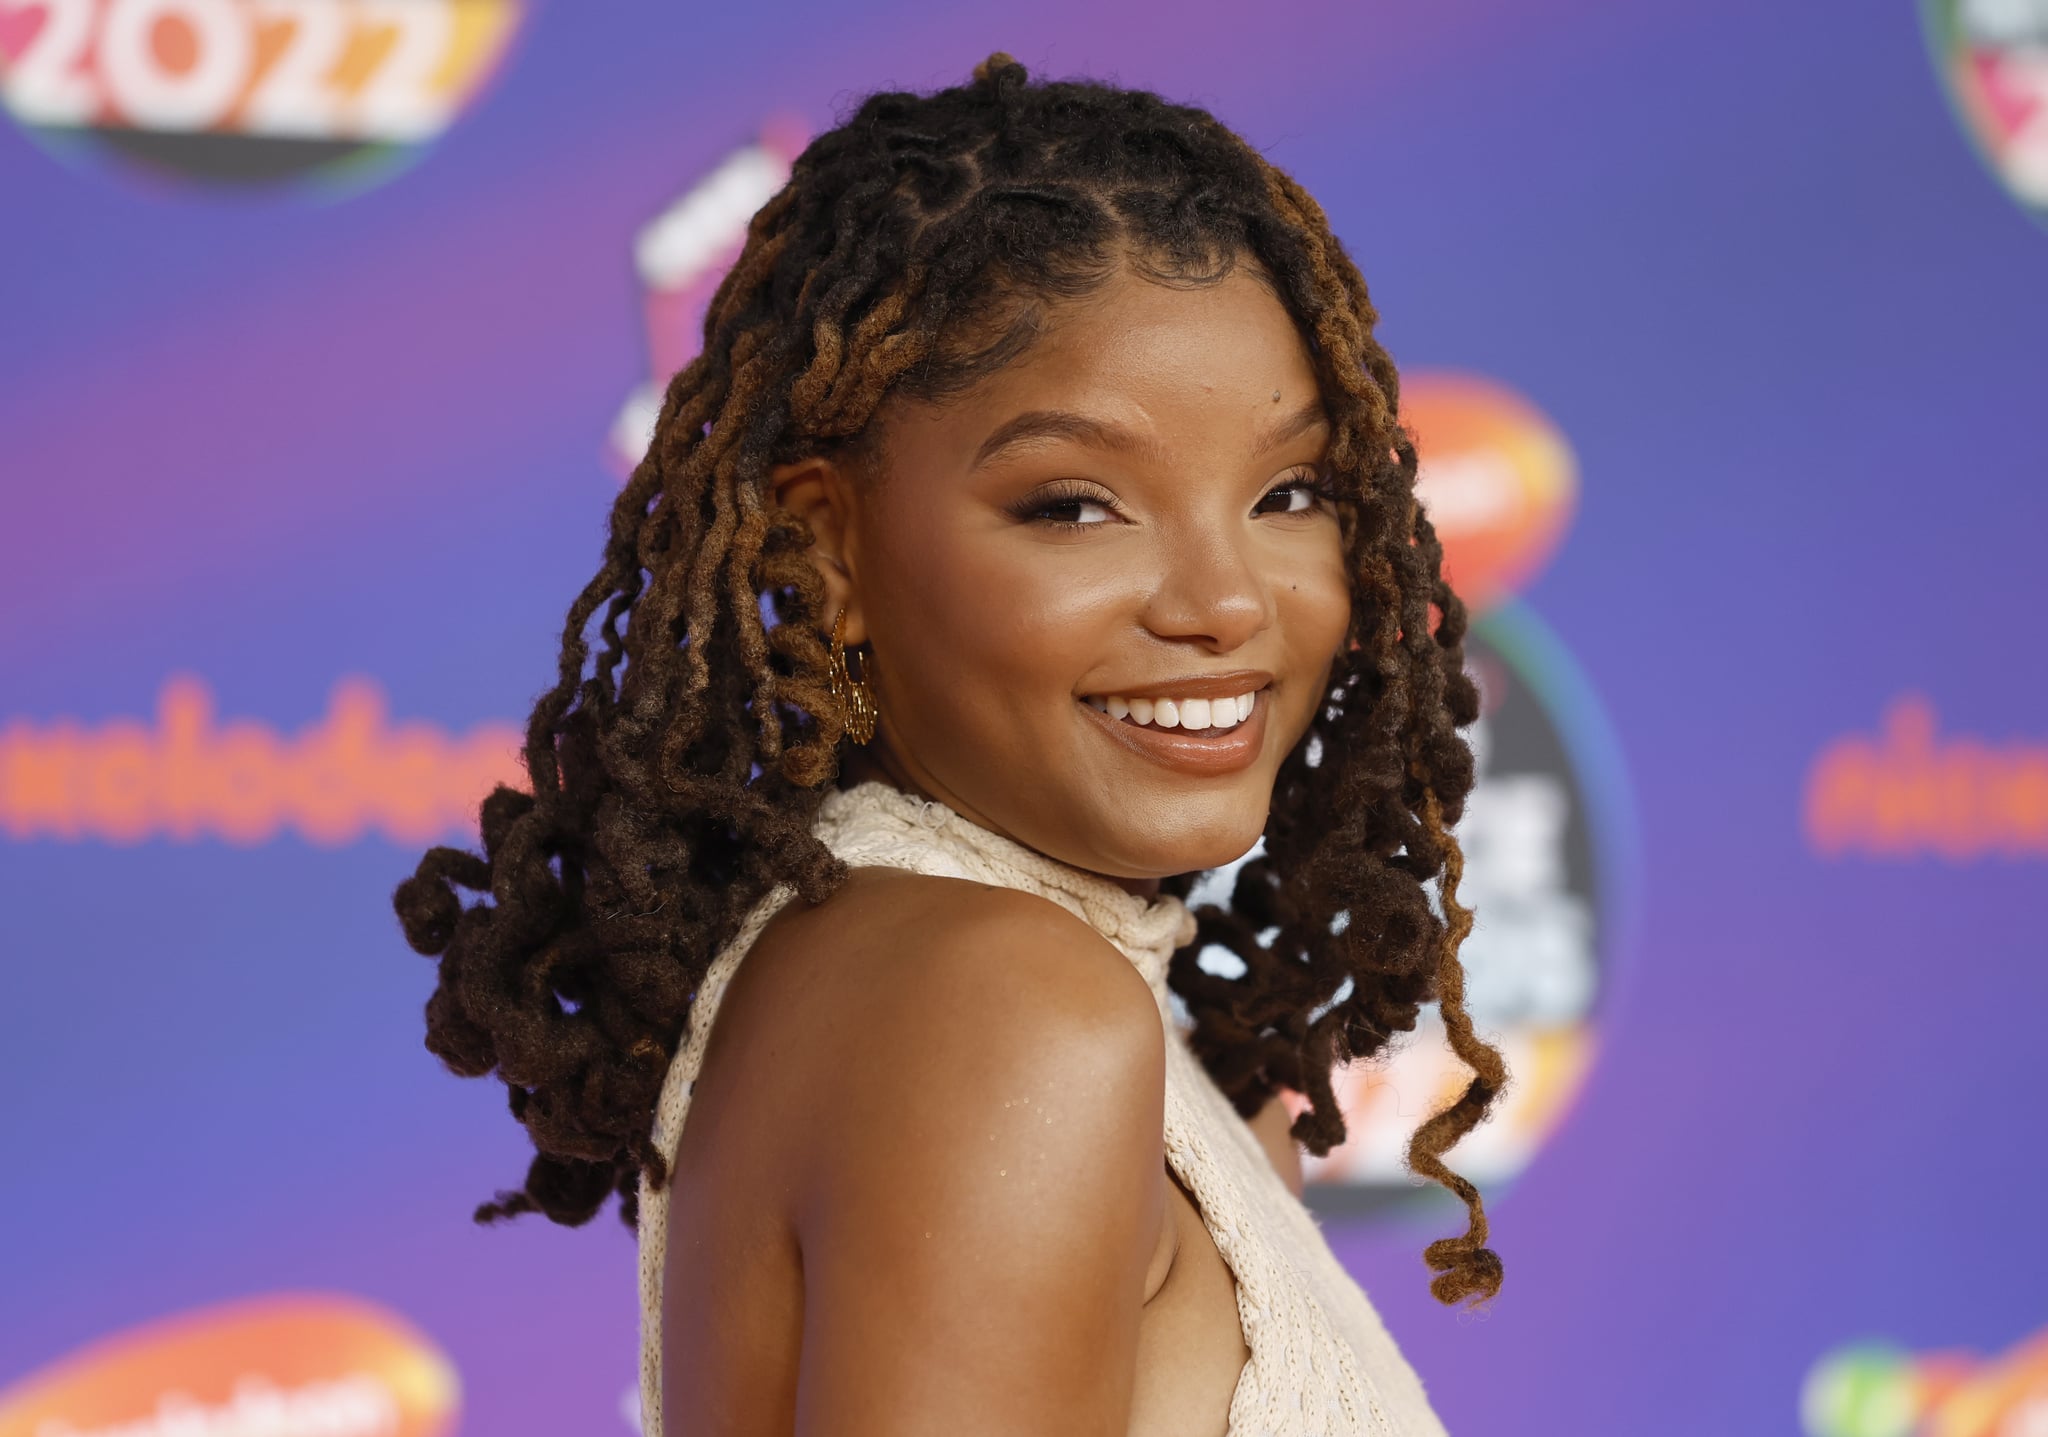 SANTA MONICA, CALIFORNIA - APRIL 09: Halle Bailey attends the 2022 Nickelodeon Kid's Choice Awards at Barker Hangar on April 09, 2022 in Santa Monica, California. (Photo by Frazer Harrison/Getty Images)